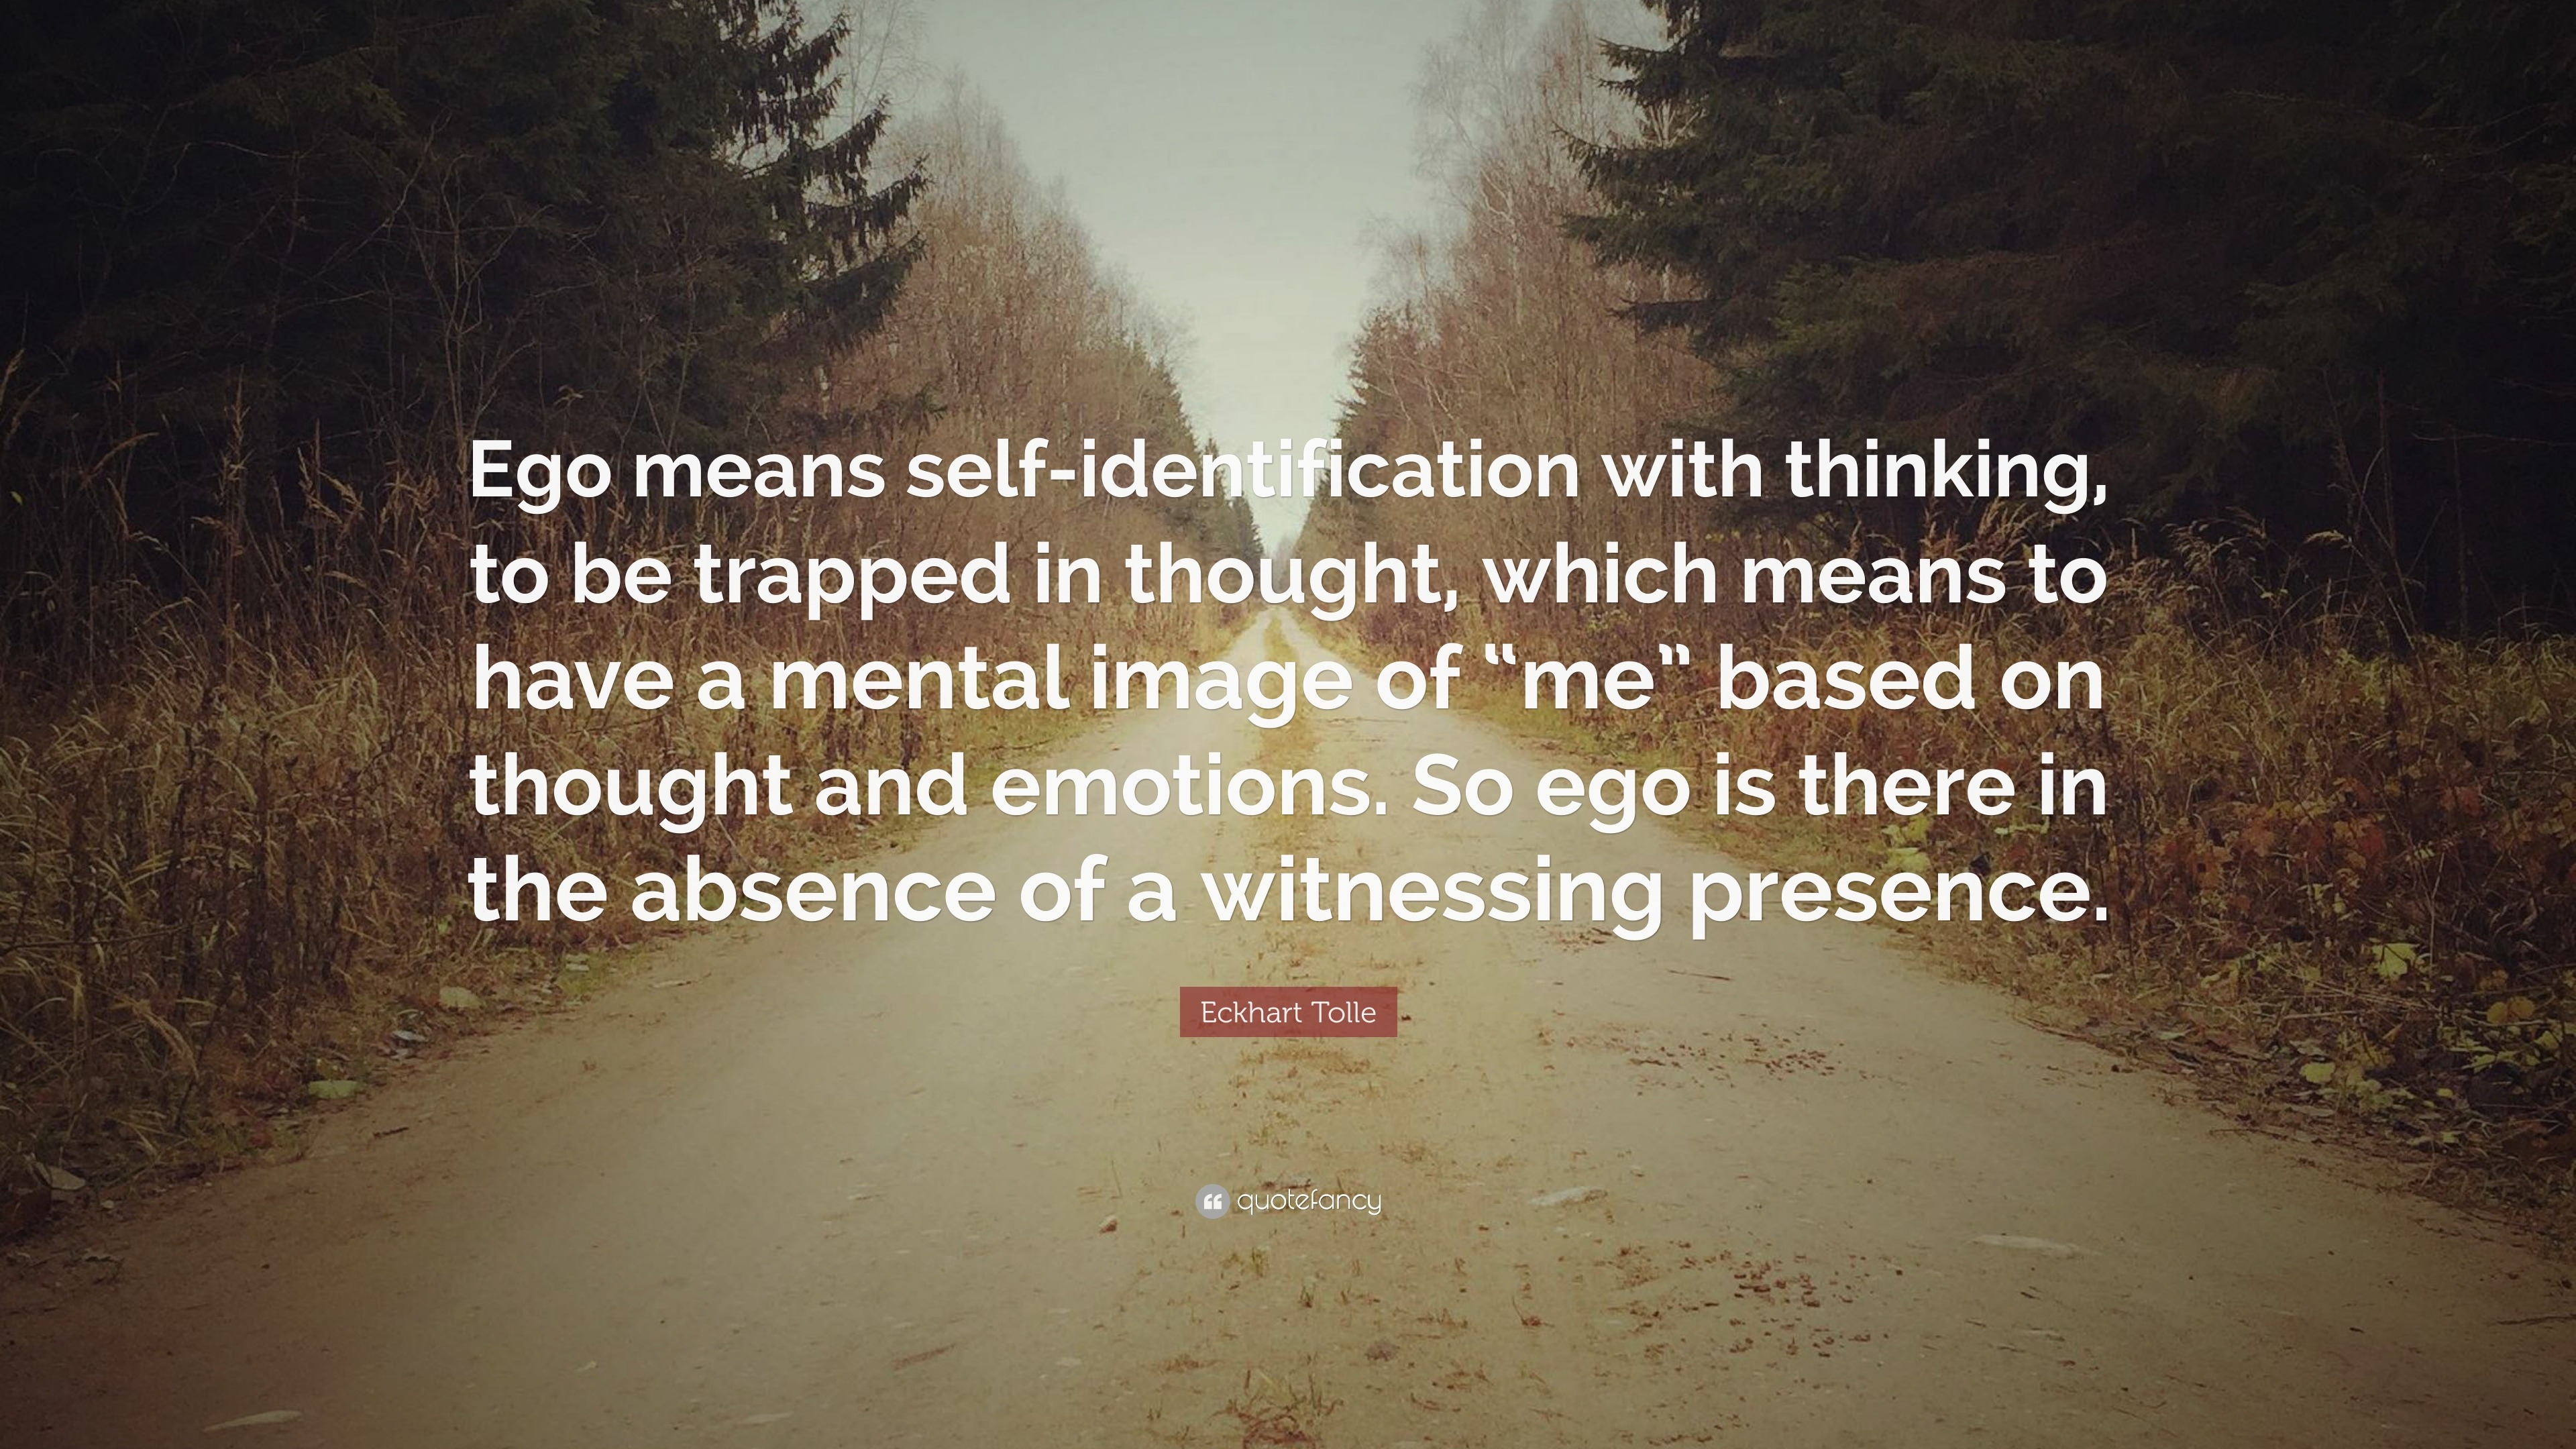 Eckhart Tolle Quote: “Ego means self-identification with thinking, to